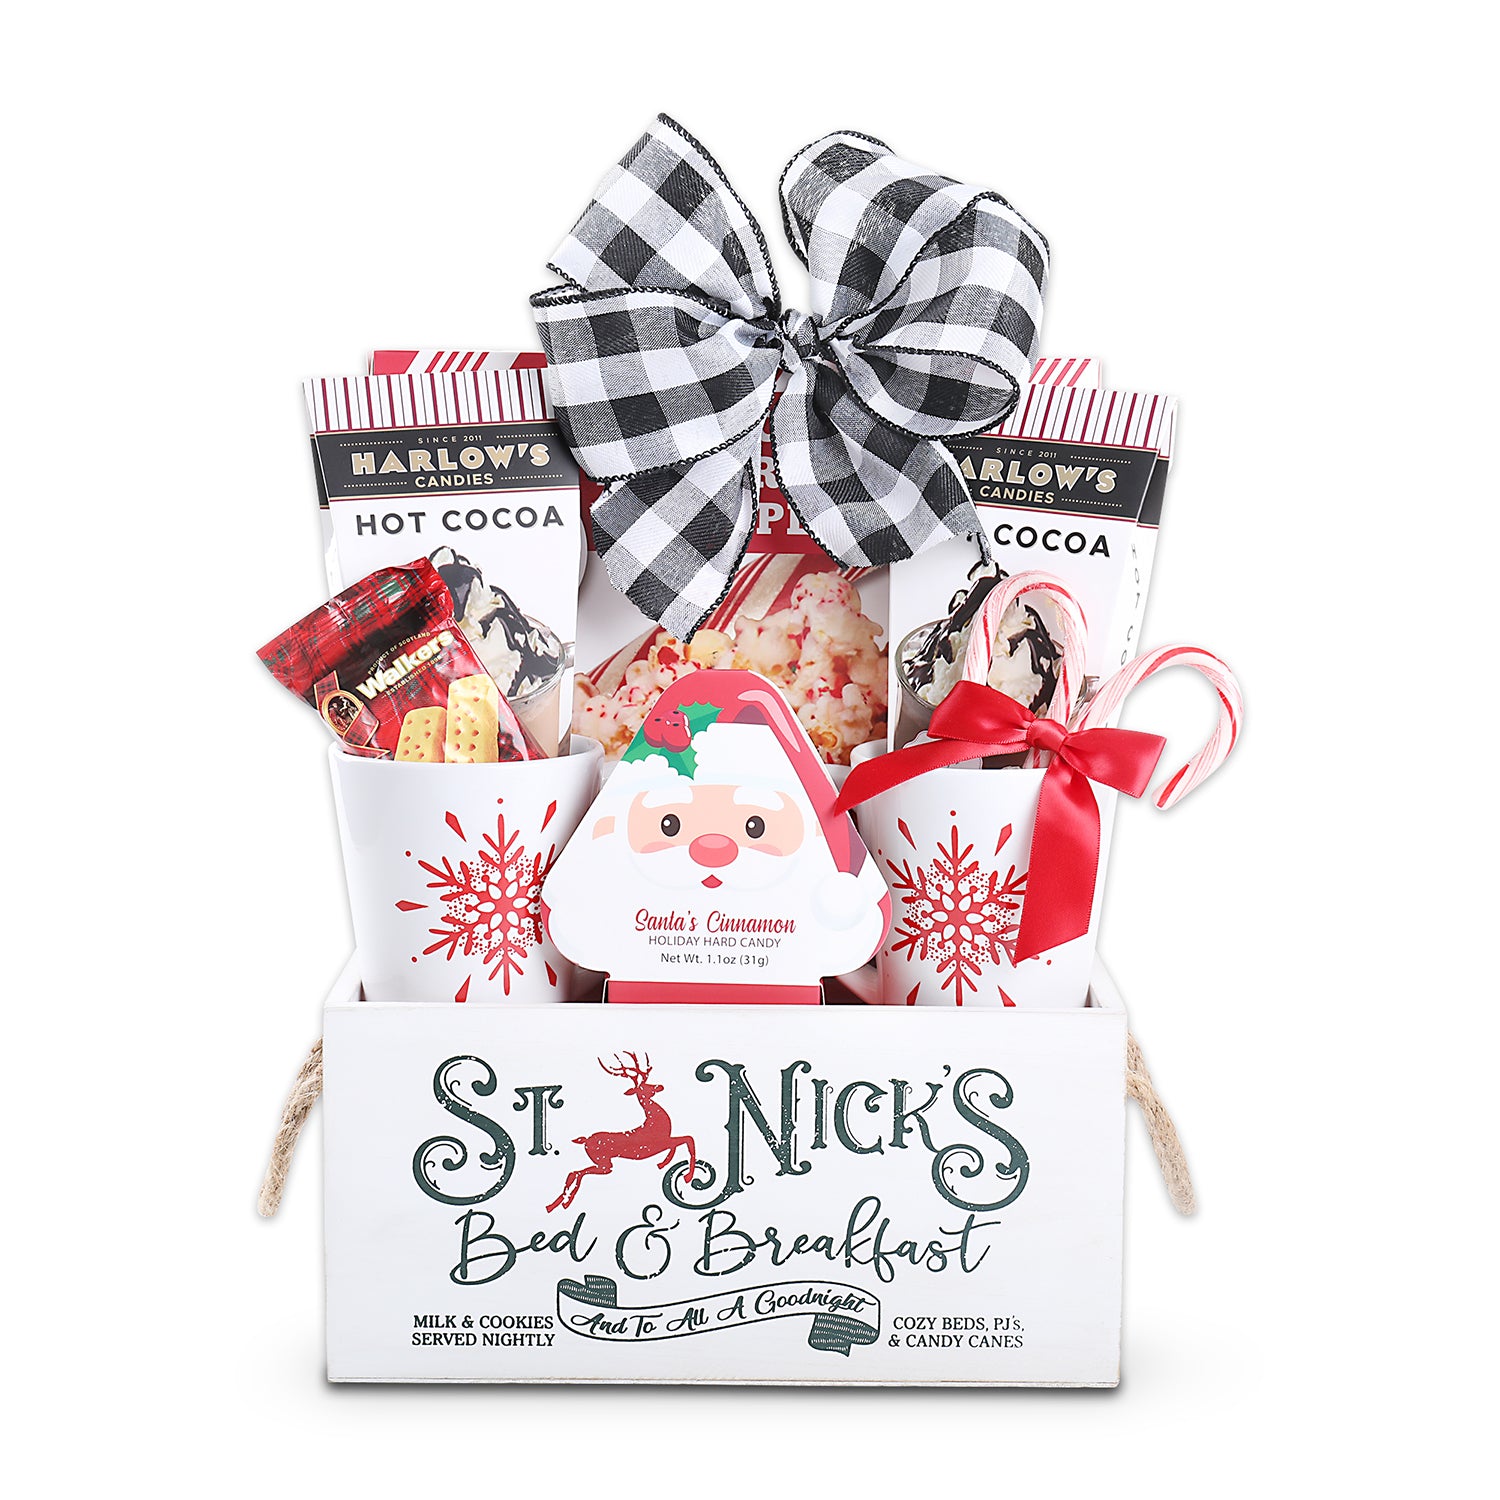 St Nicks Wooden Crate (10.25x6x5"), Candy Cane Popcorn (6oz), Harlow's Hot Cocoa (2), Candy Cane (2pk), Santa's Cinnamon Hard Candy (1.1oz), Walkers Shortbread Fingers (1.0oz), 2 Ceramic Mugs